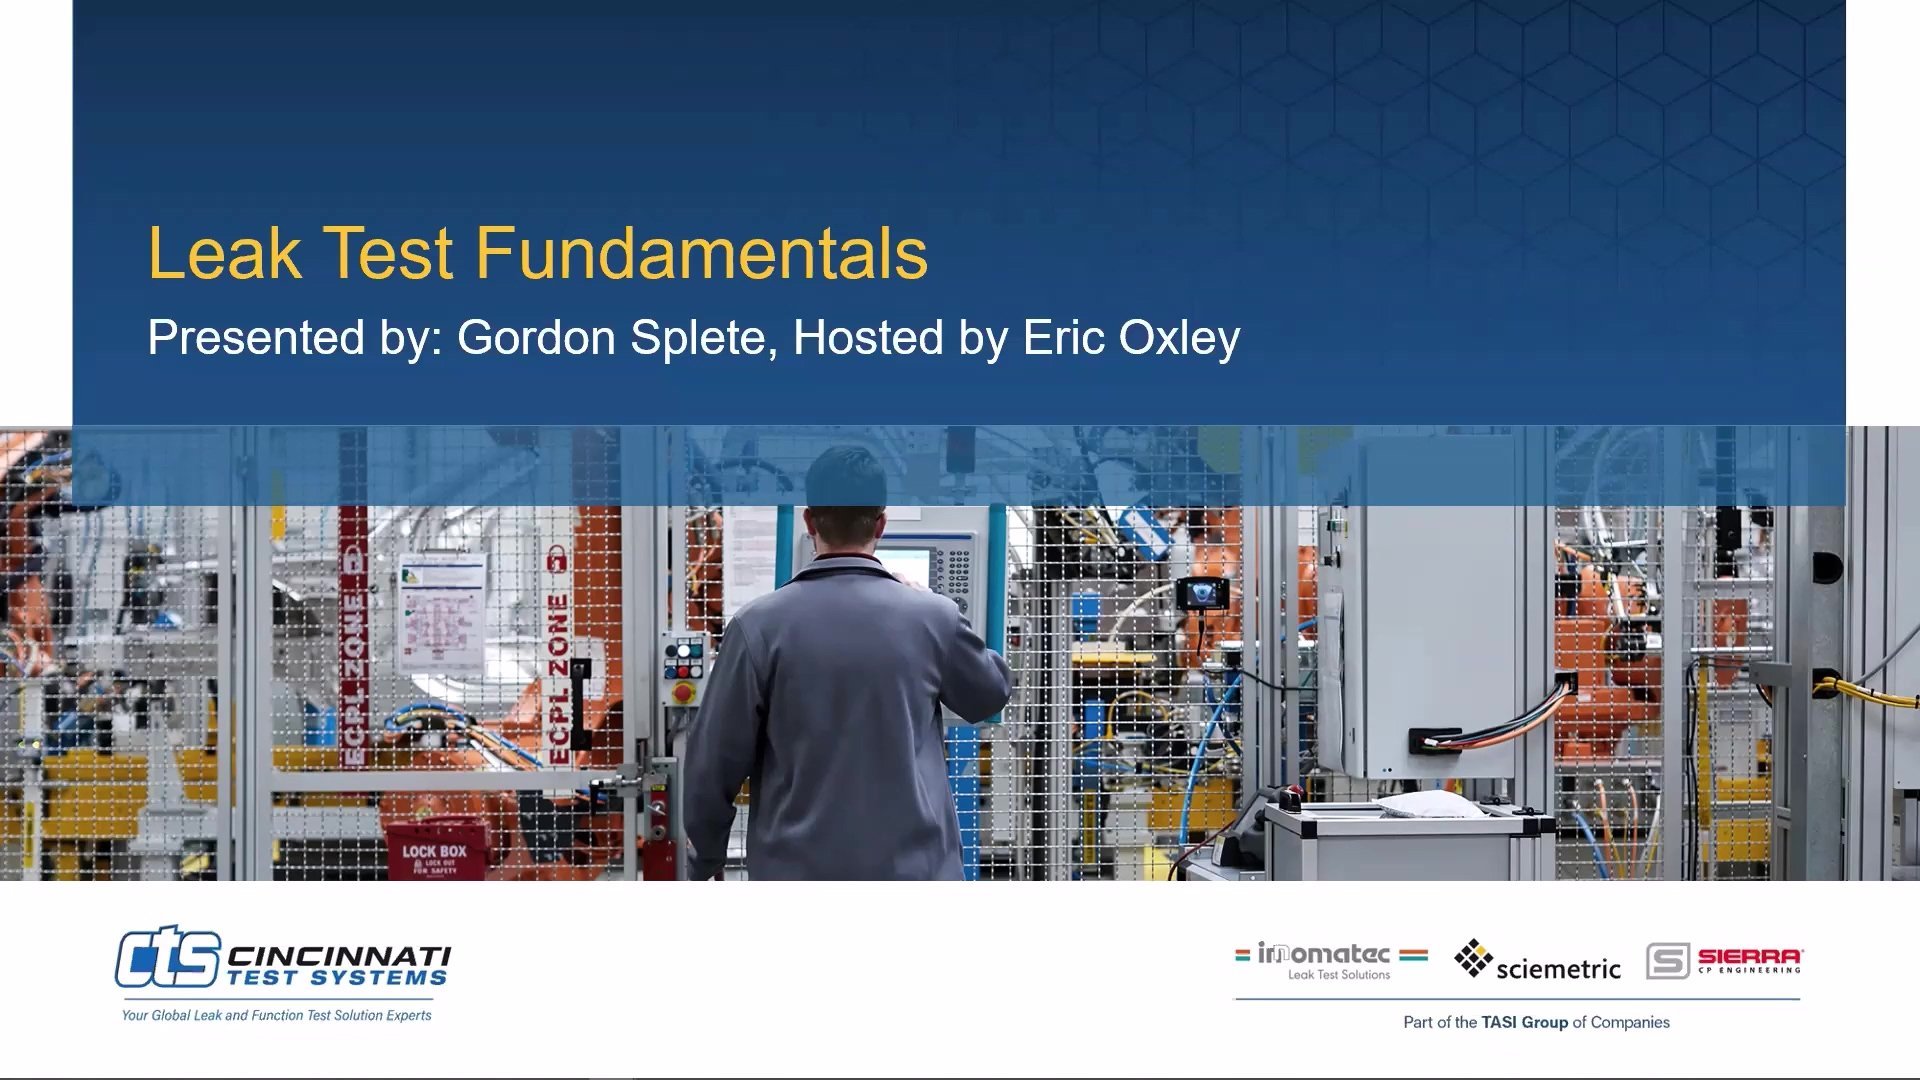 Leak Test Fundamentals webinar cover image of employee working with products